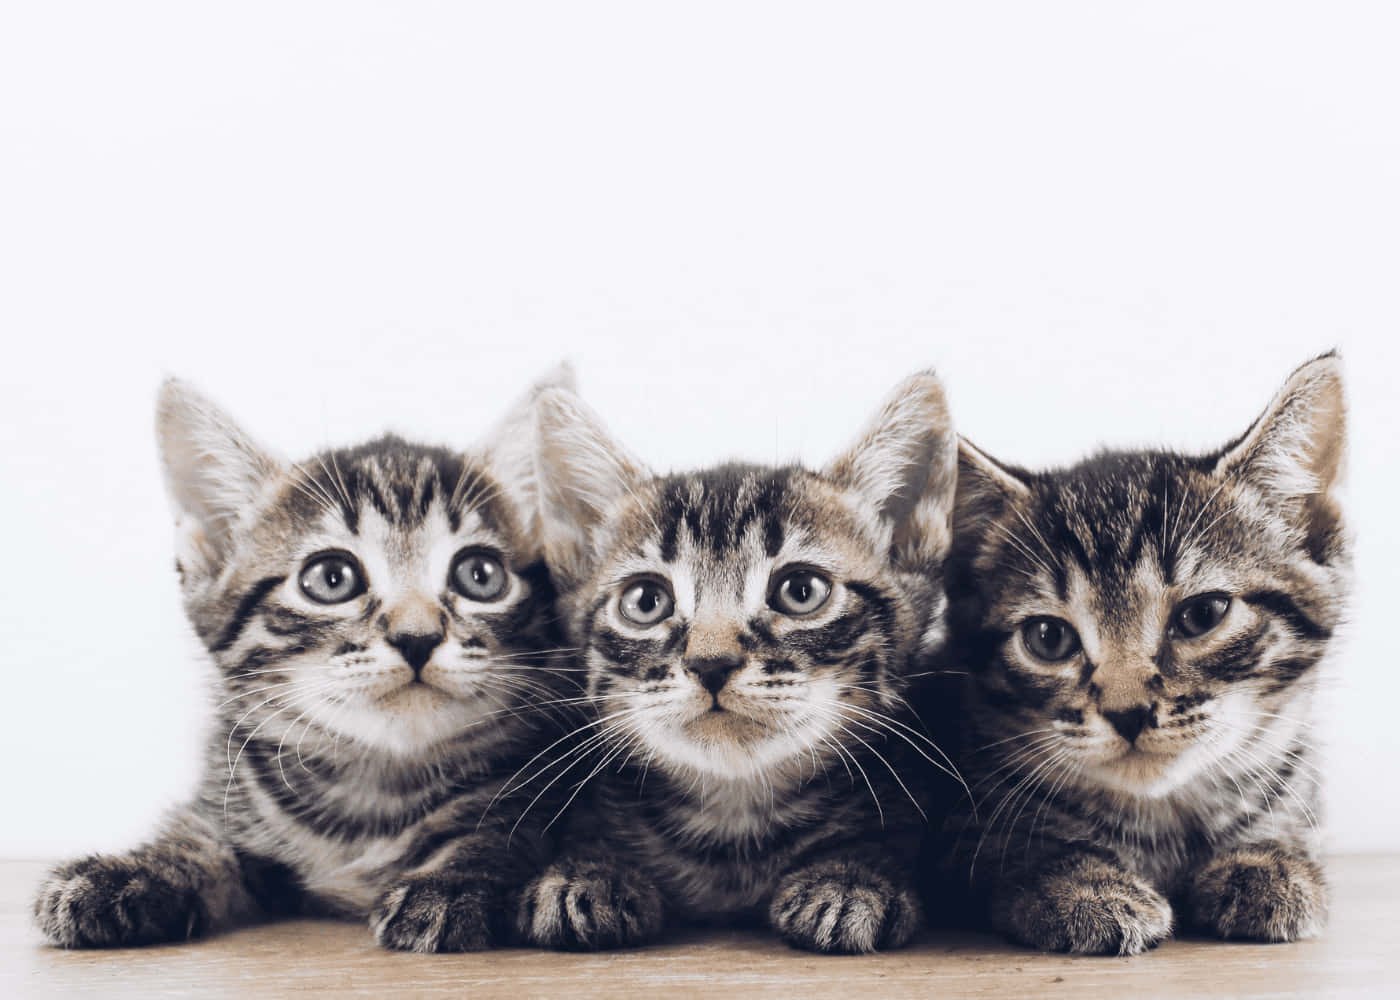 Cute Cats Chilling Together Pictures